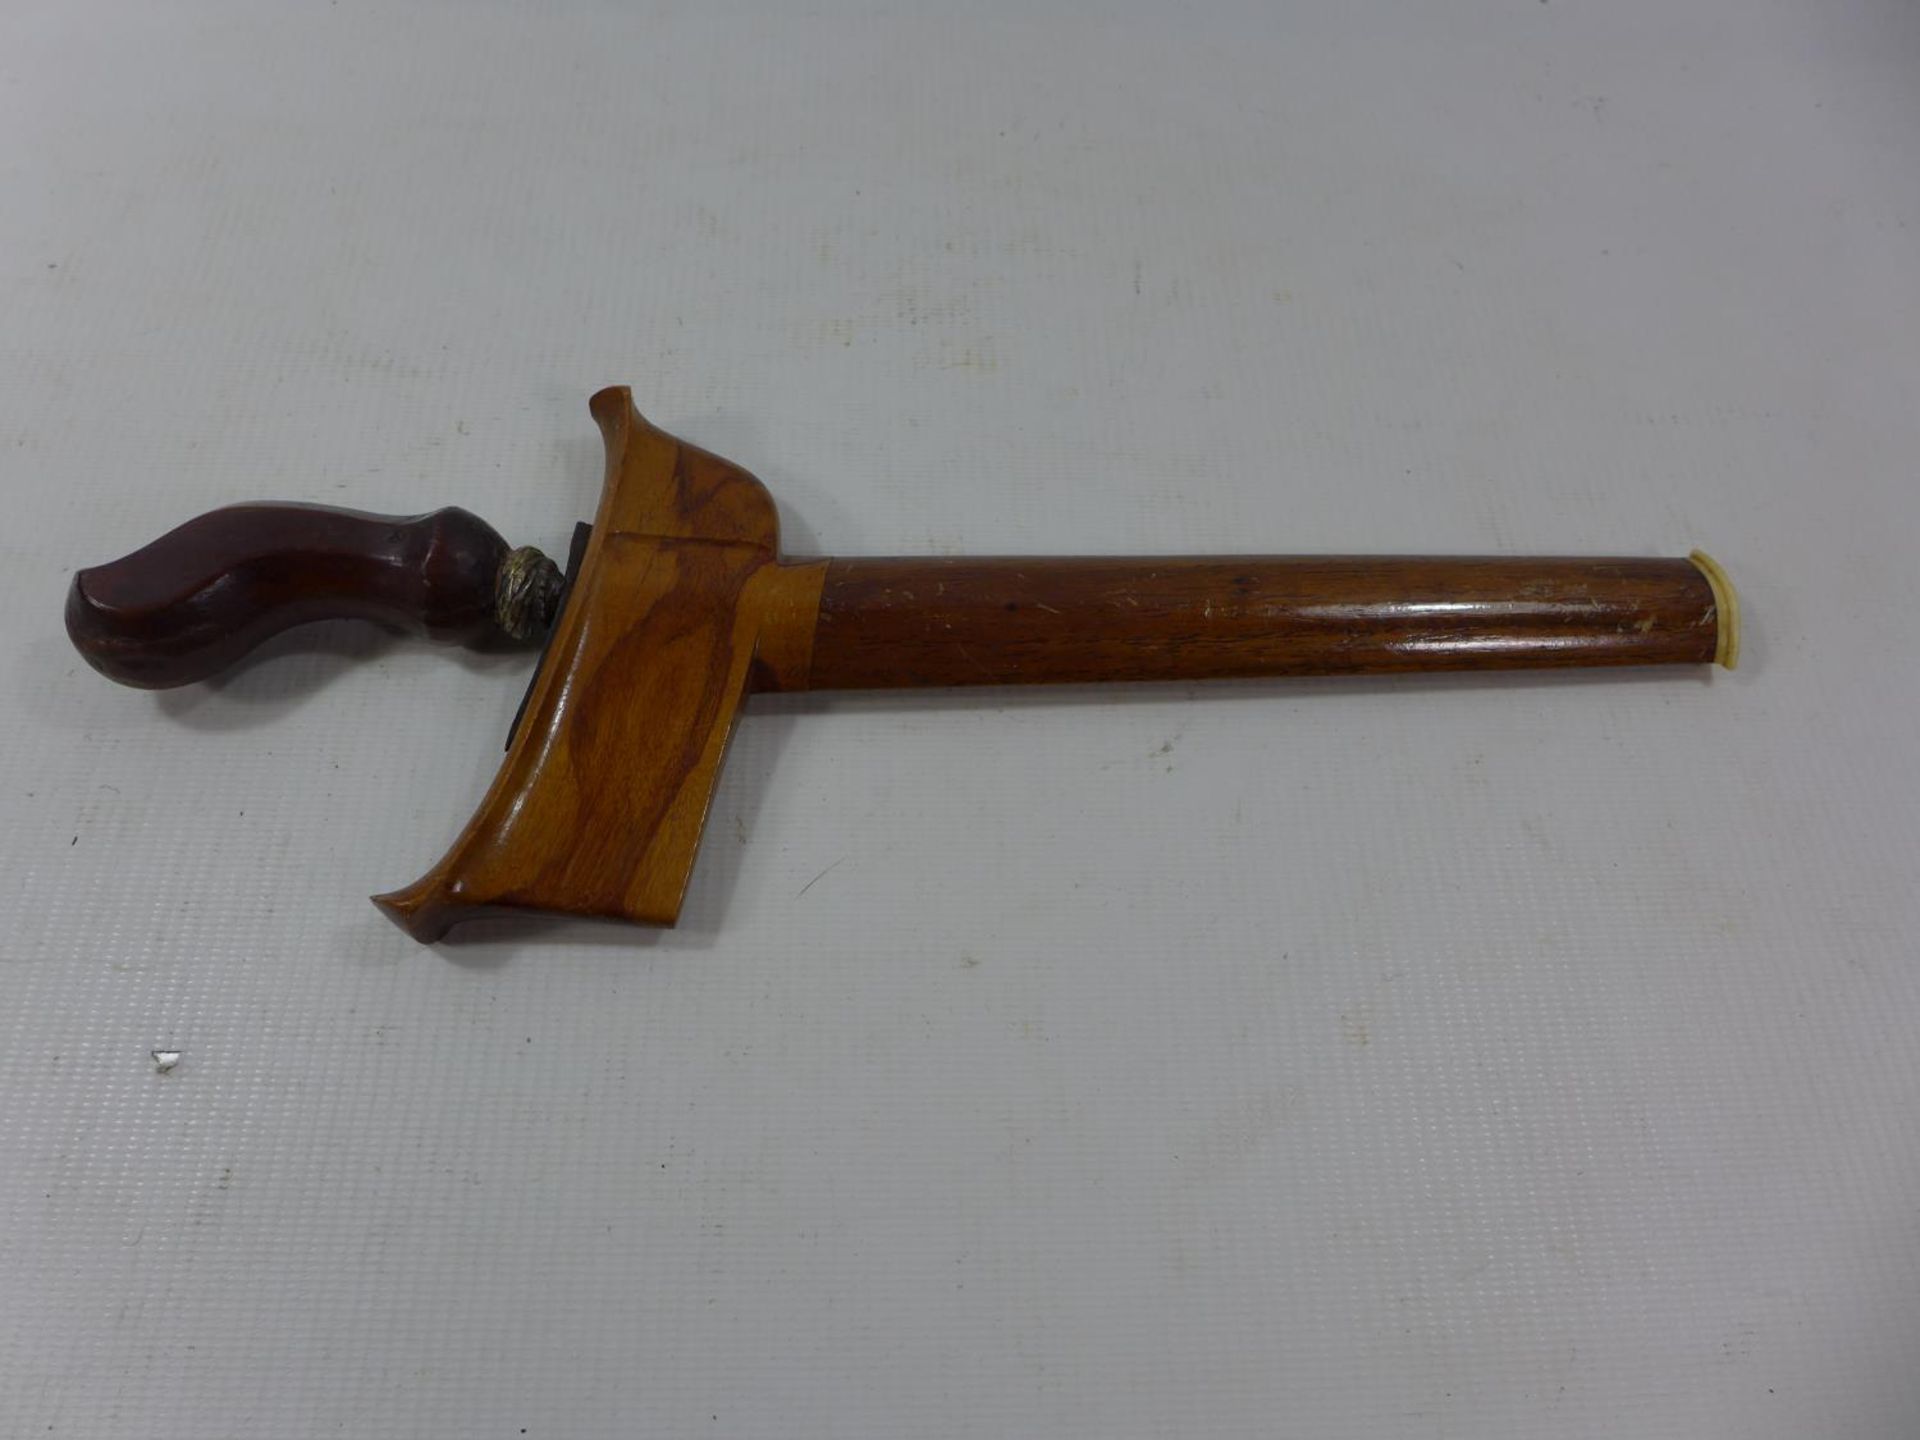 A BALANISE KRIS, 21CM WAVY BLADE, WOODEN GRIP AND SCABBARD - Image 3 of 3